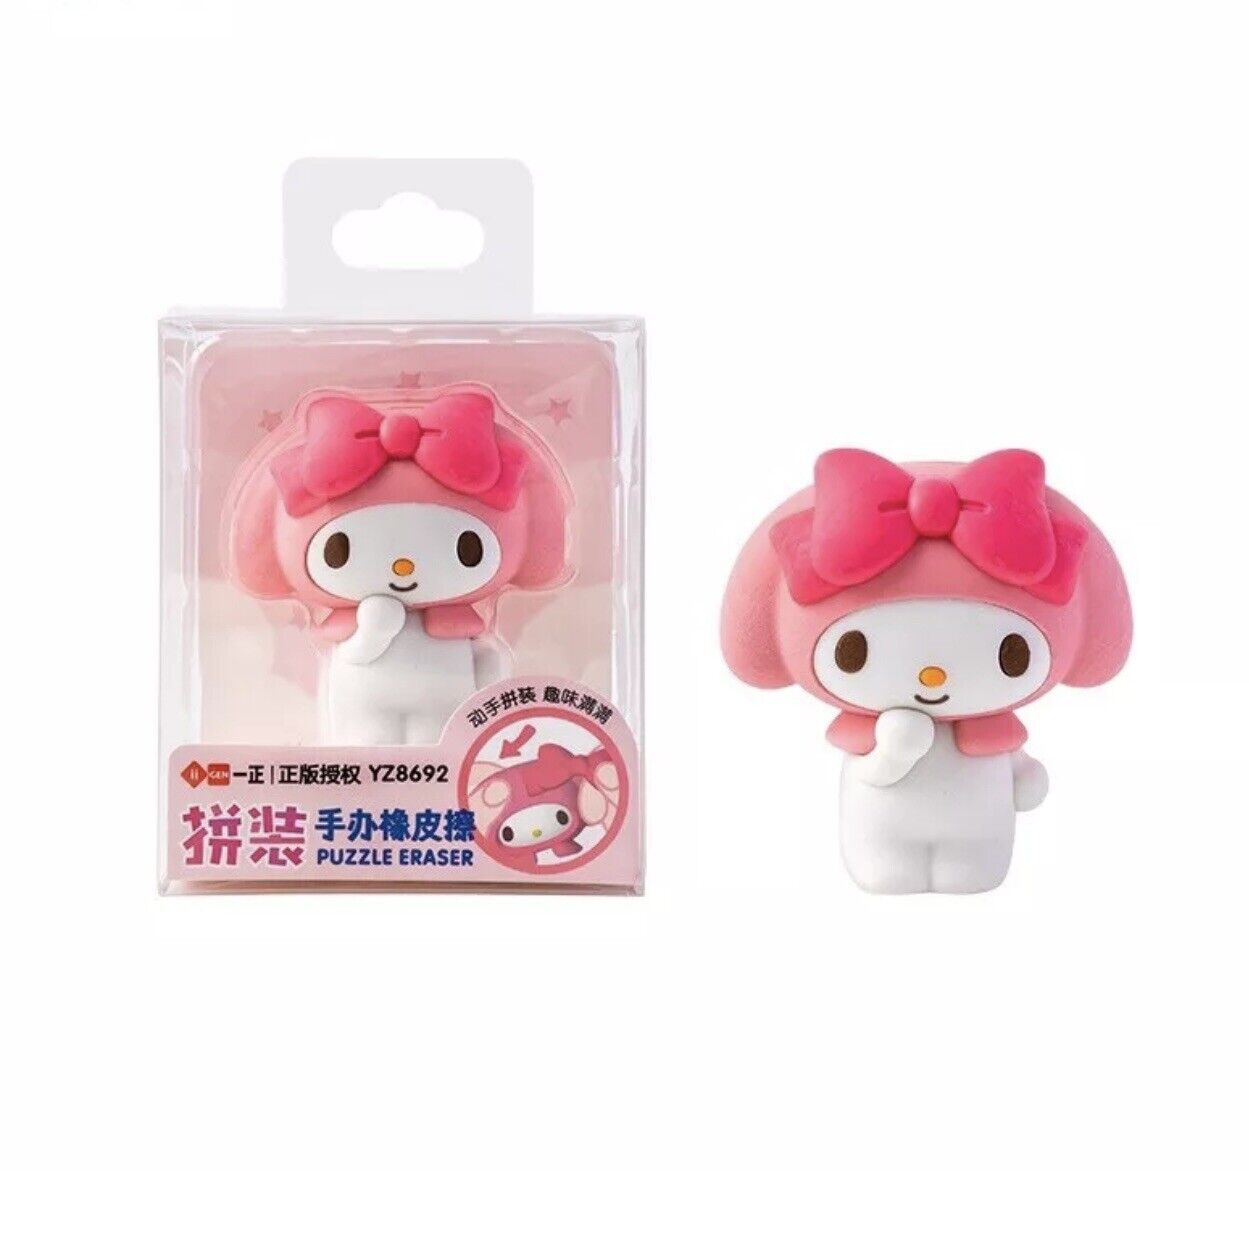 Sanrio My Melody DIY Assembly Puzzle Eraser Fun Stationery New IN Box